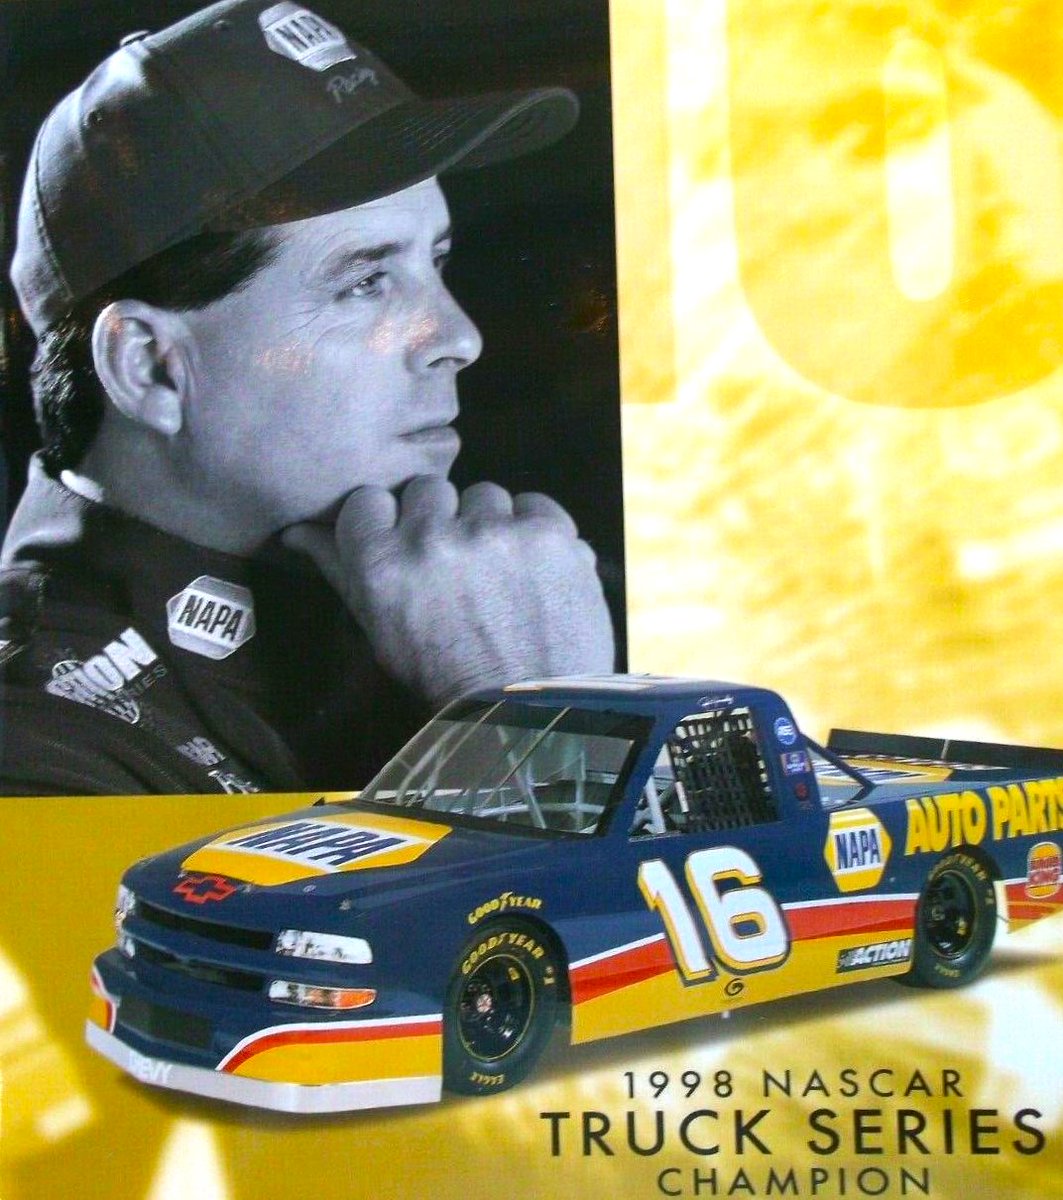 Ron Hornaday won the 1998 Chevy Trucks NASCAR 150 at Phoenix 26 years ago today. 🏁 Hornaday won six @NASCAR_Trucks races in 1998 and his second Truck series championship. #DaleEarnhardtInc 🏁 #NASCARLegends